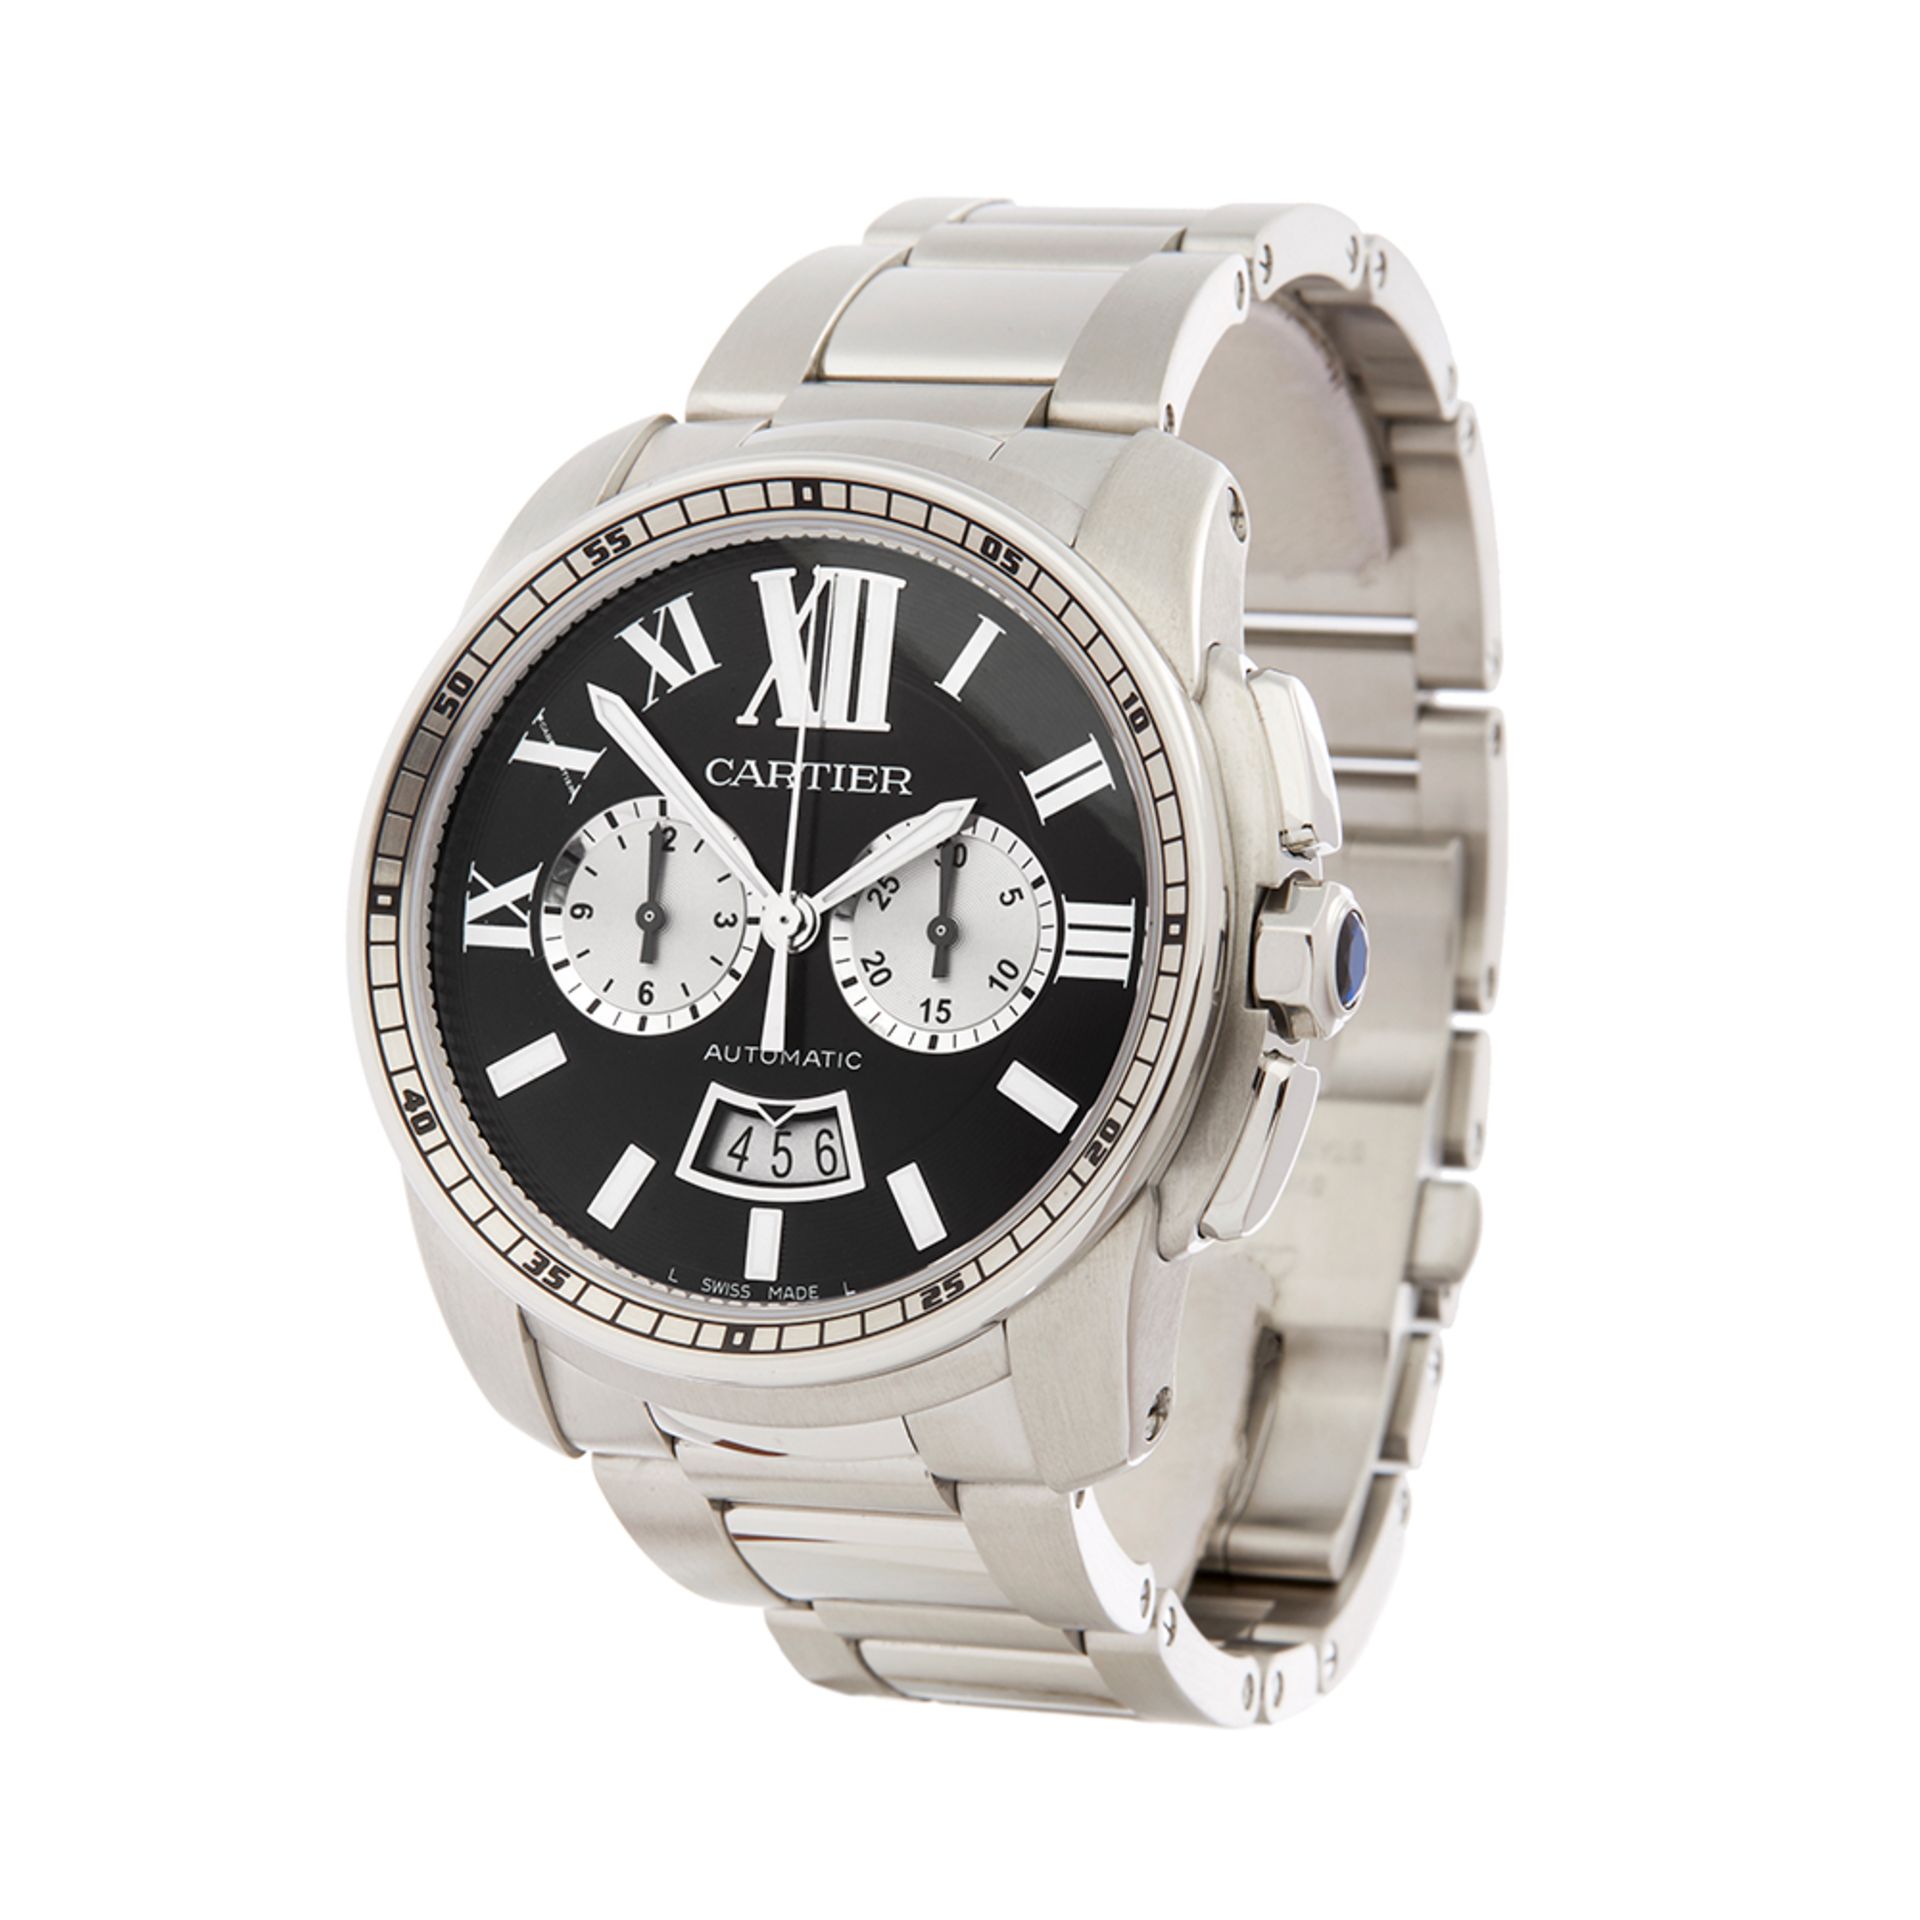 Cartier Calibre Stainless Steel - W7100061